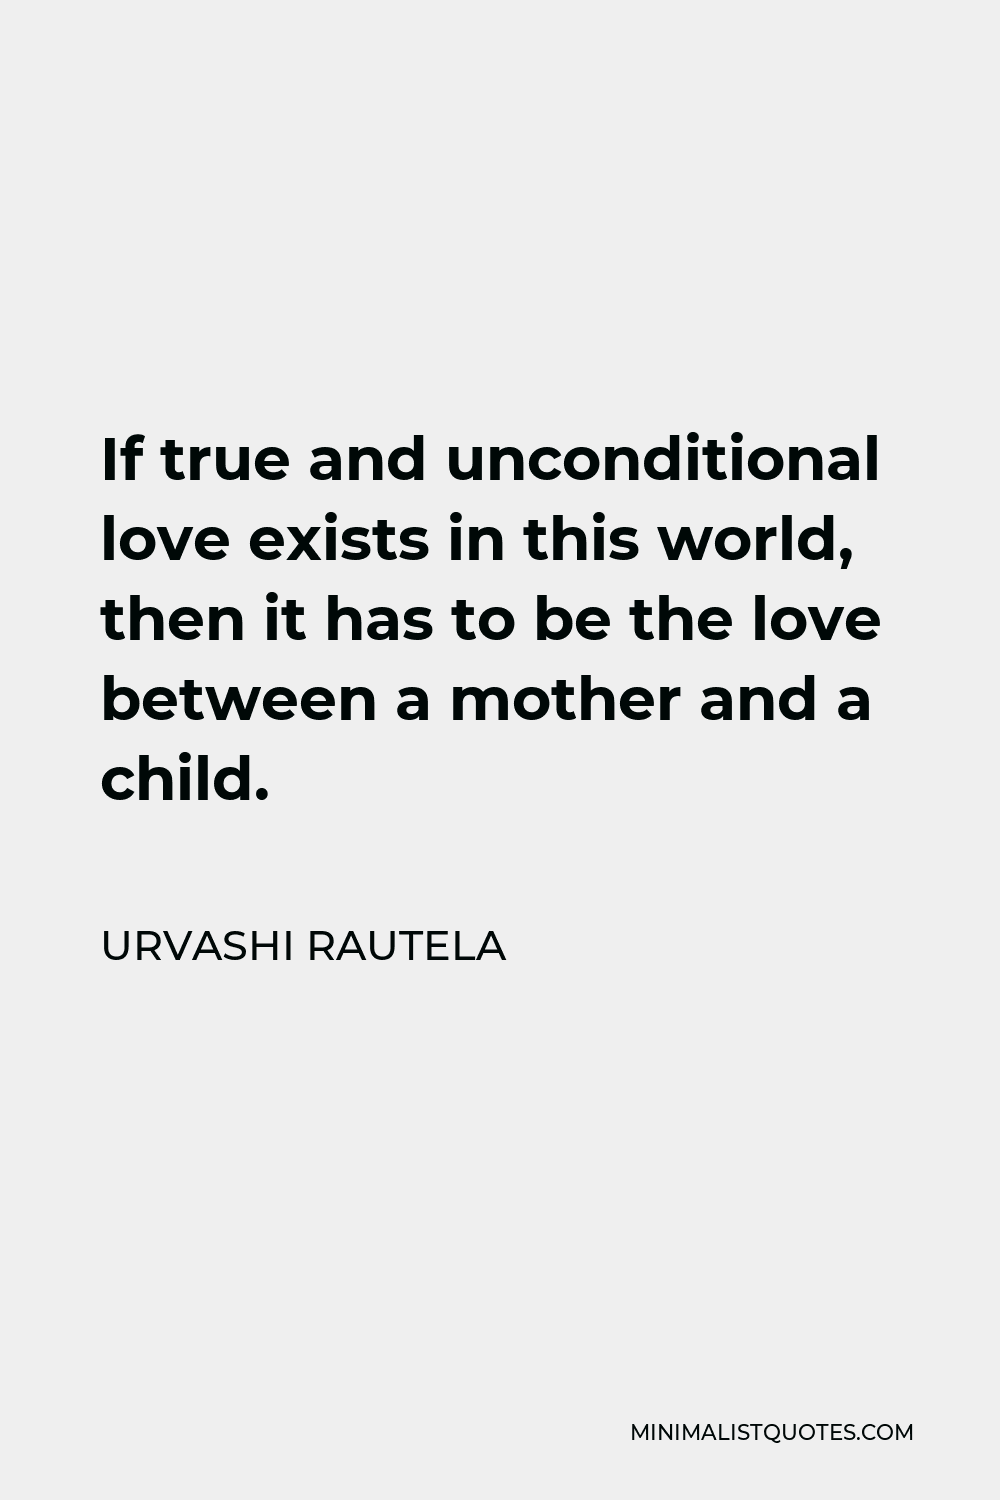 Urvashi Rautela Quote - If true and unconditional love exists in this world, then it has to be the love between a mother and a child.